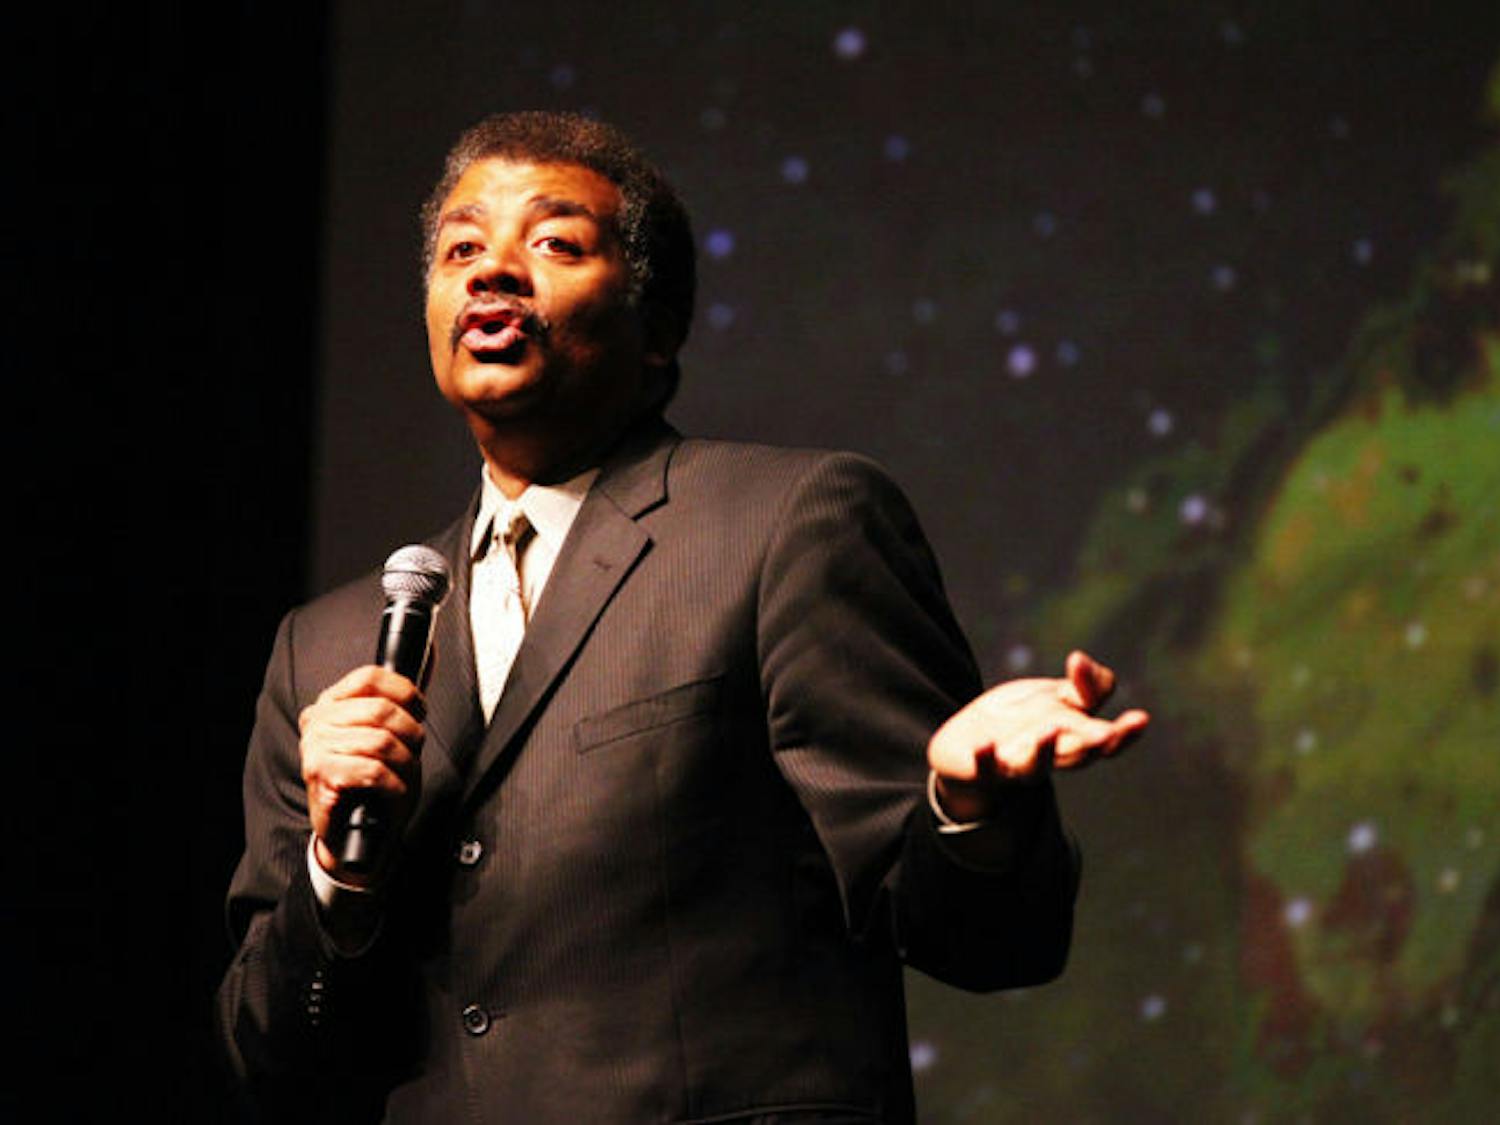 Astrophysicist Neil deGrasse Tyson talks about space and science before a full house at the Phillips Center for the Performing Arts on Wednesday night.